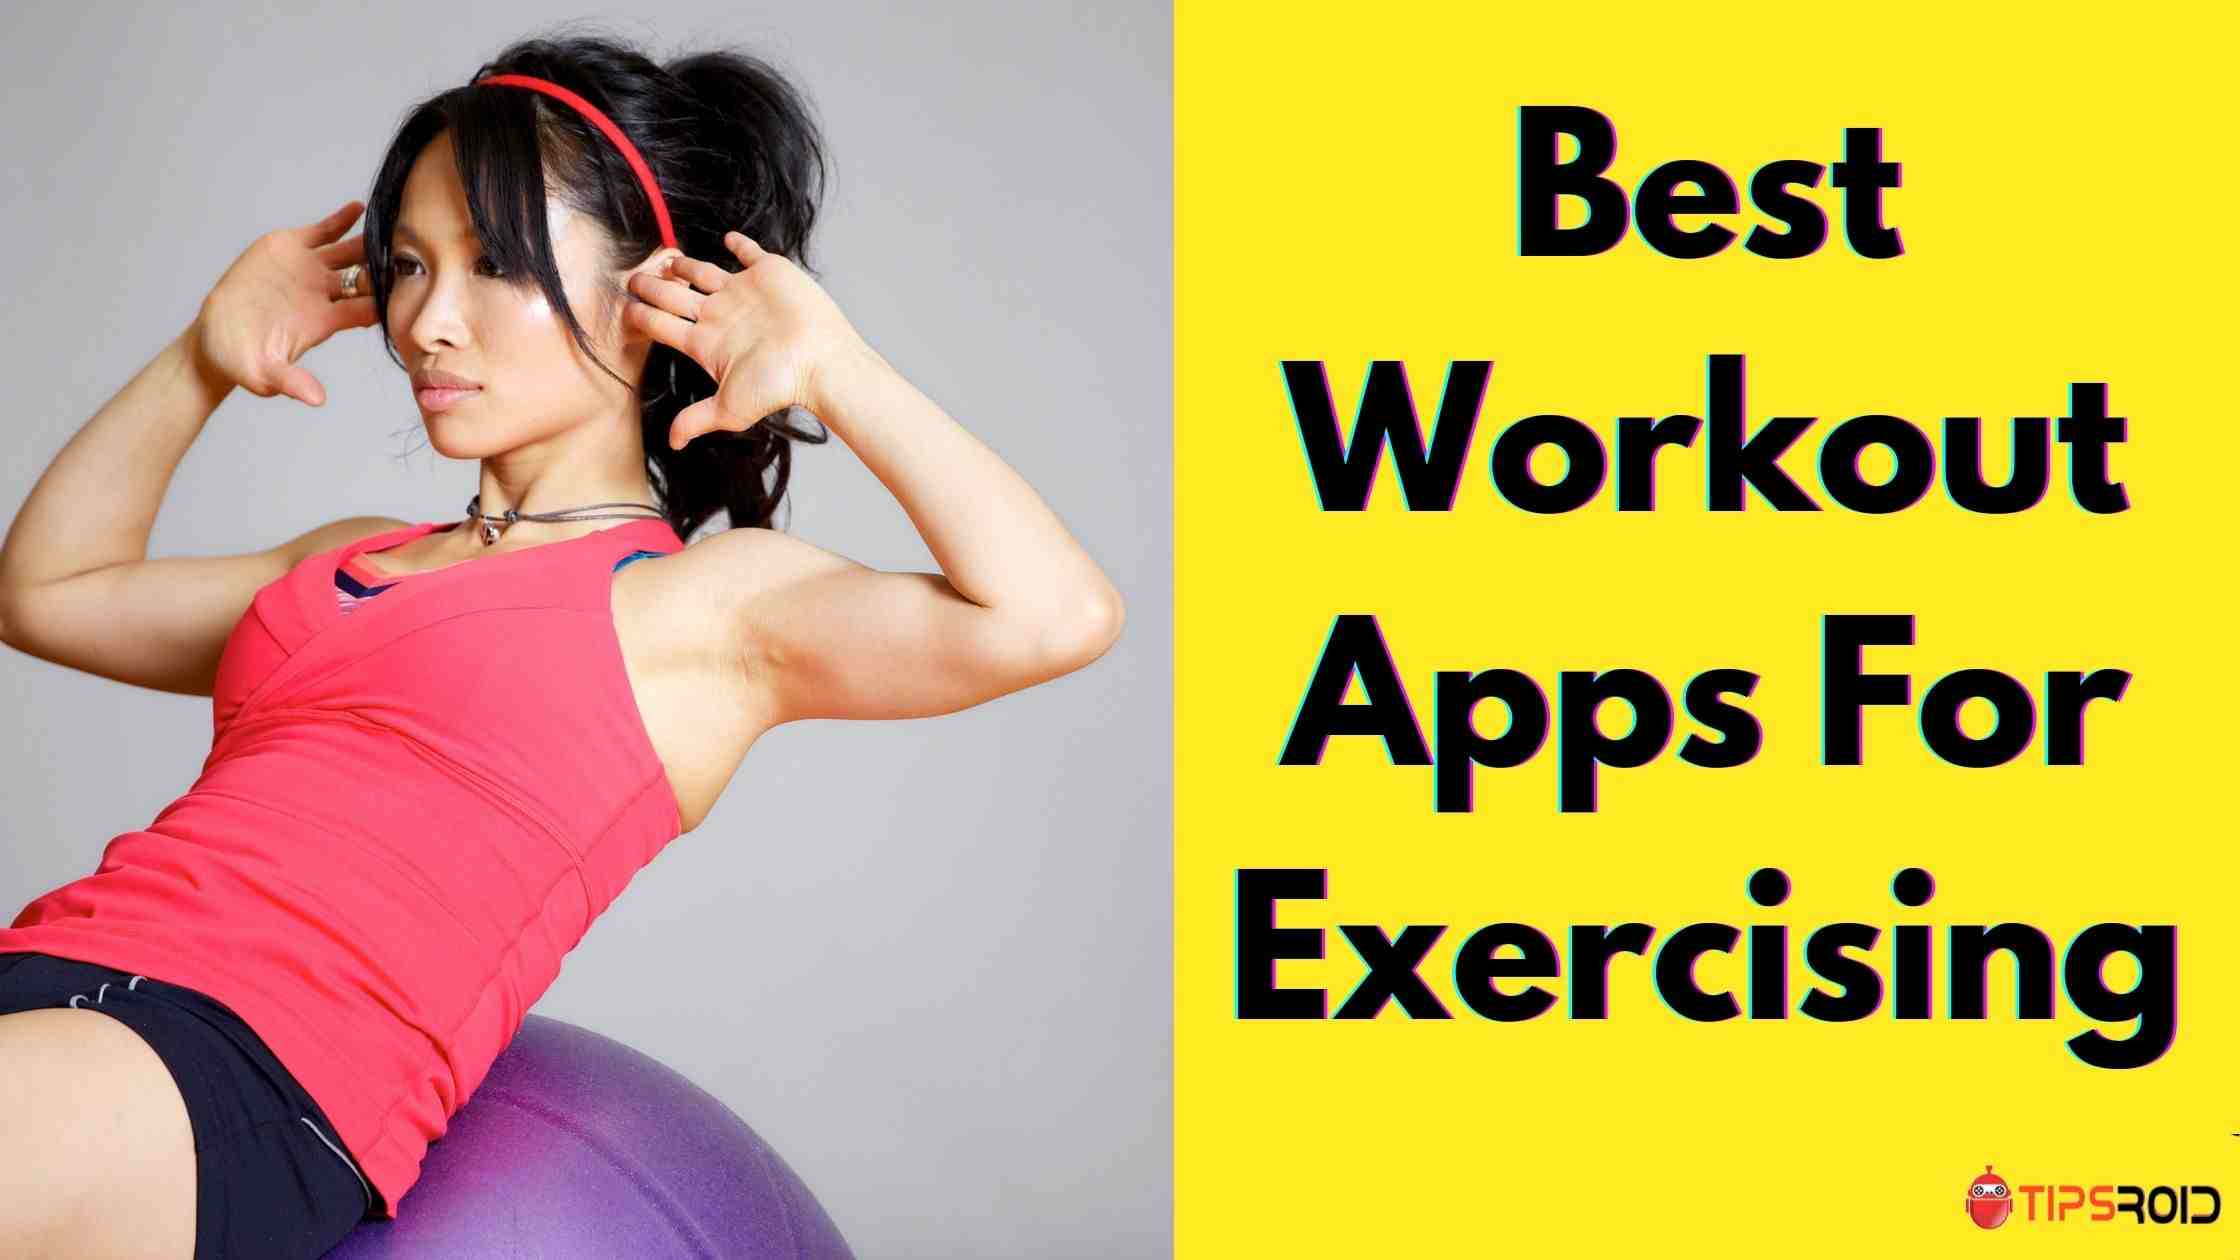 8 Best Workout Apps For Exercising At Home